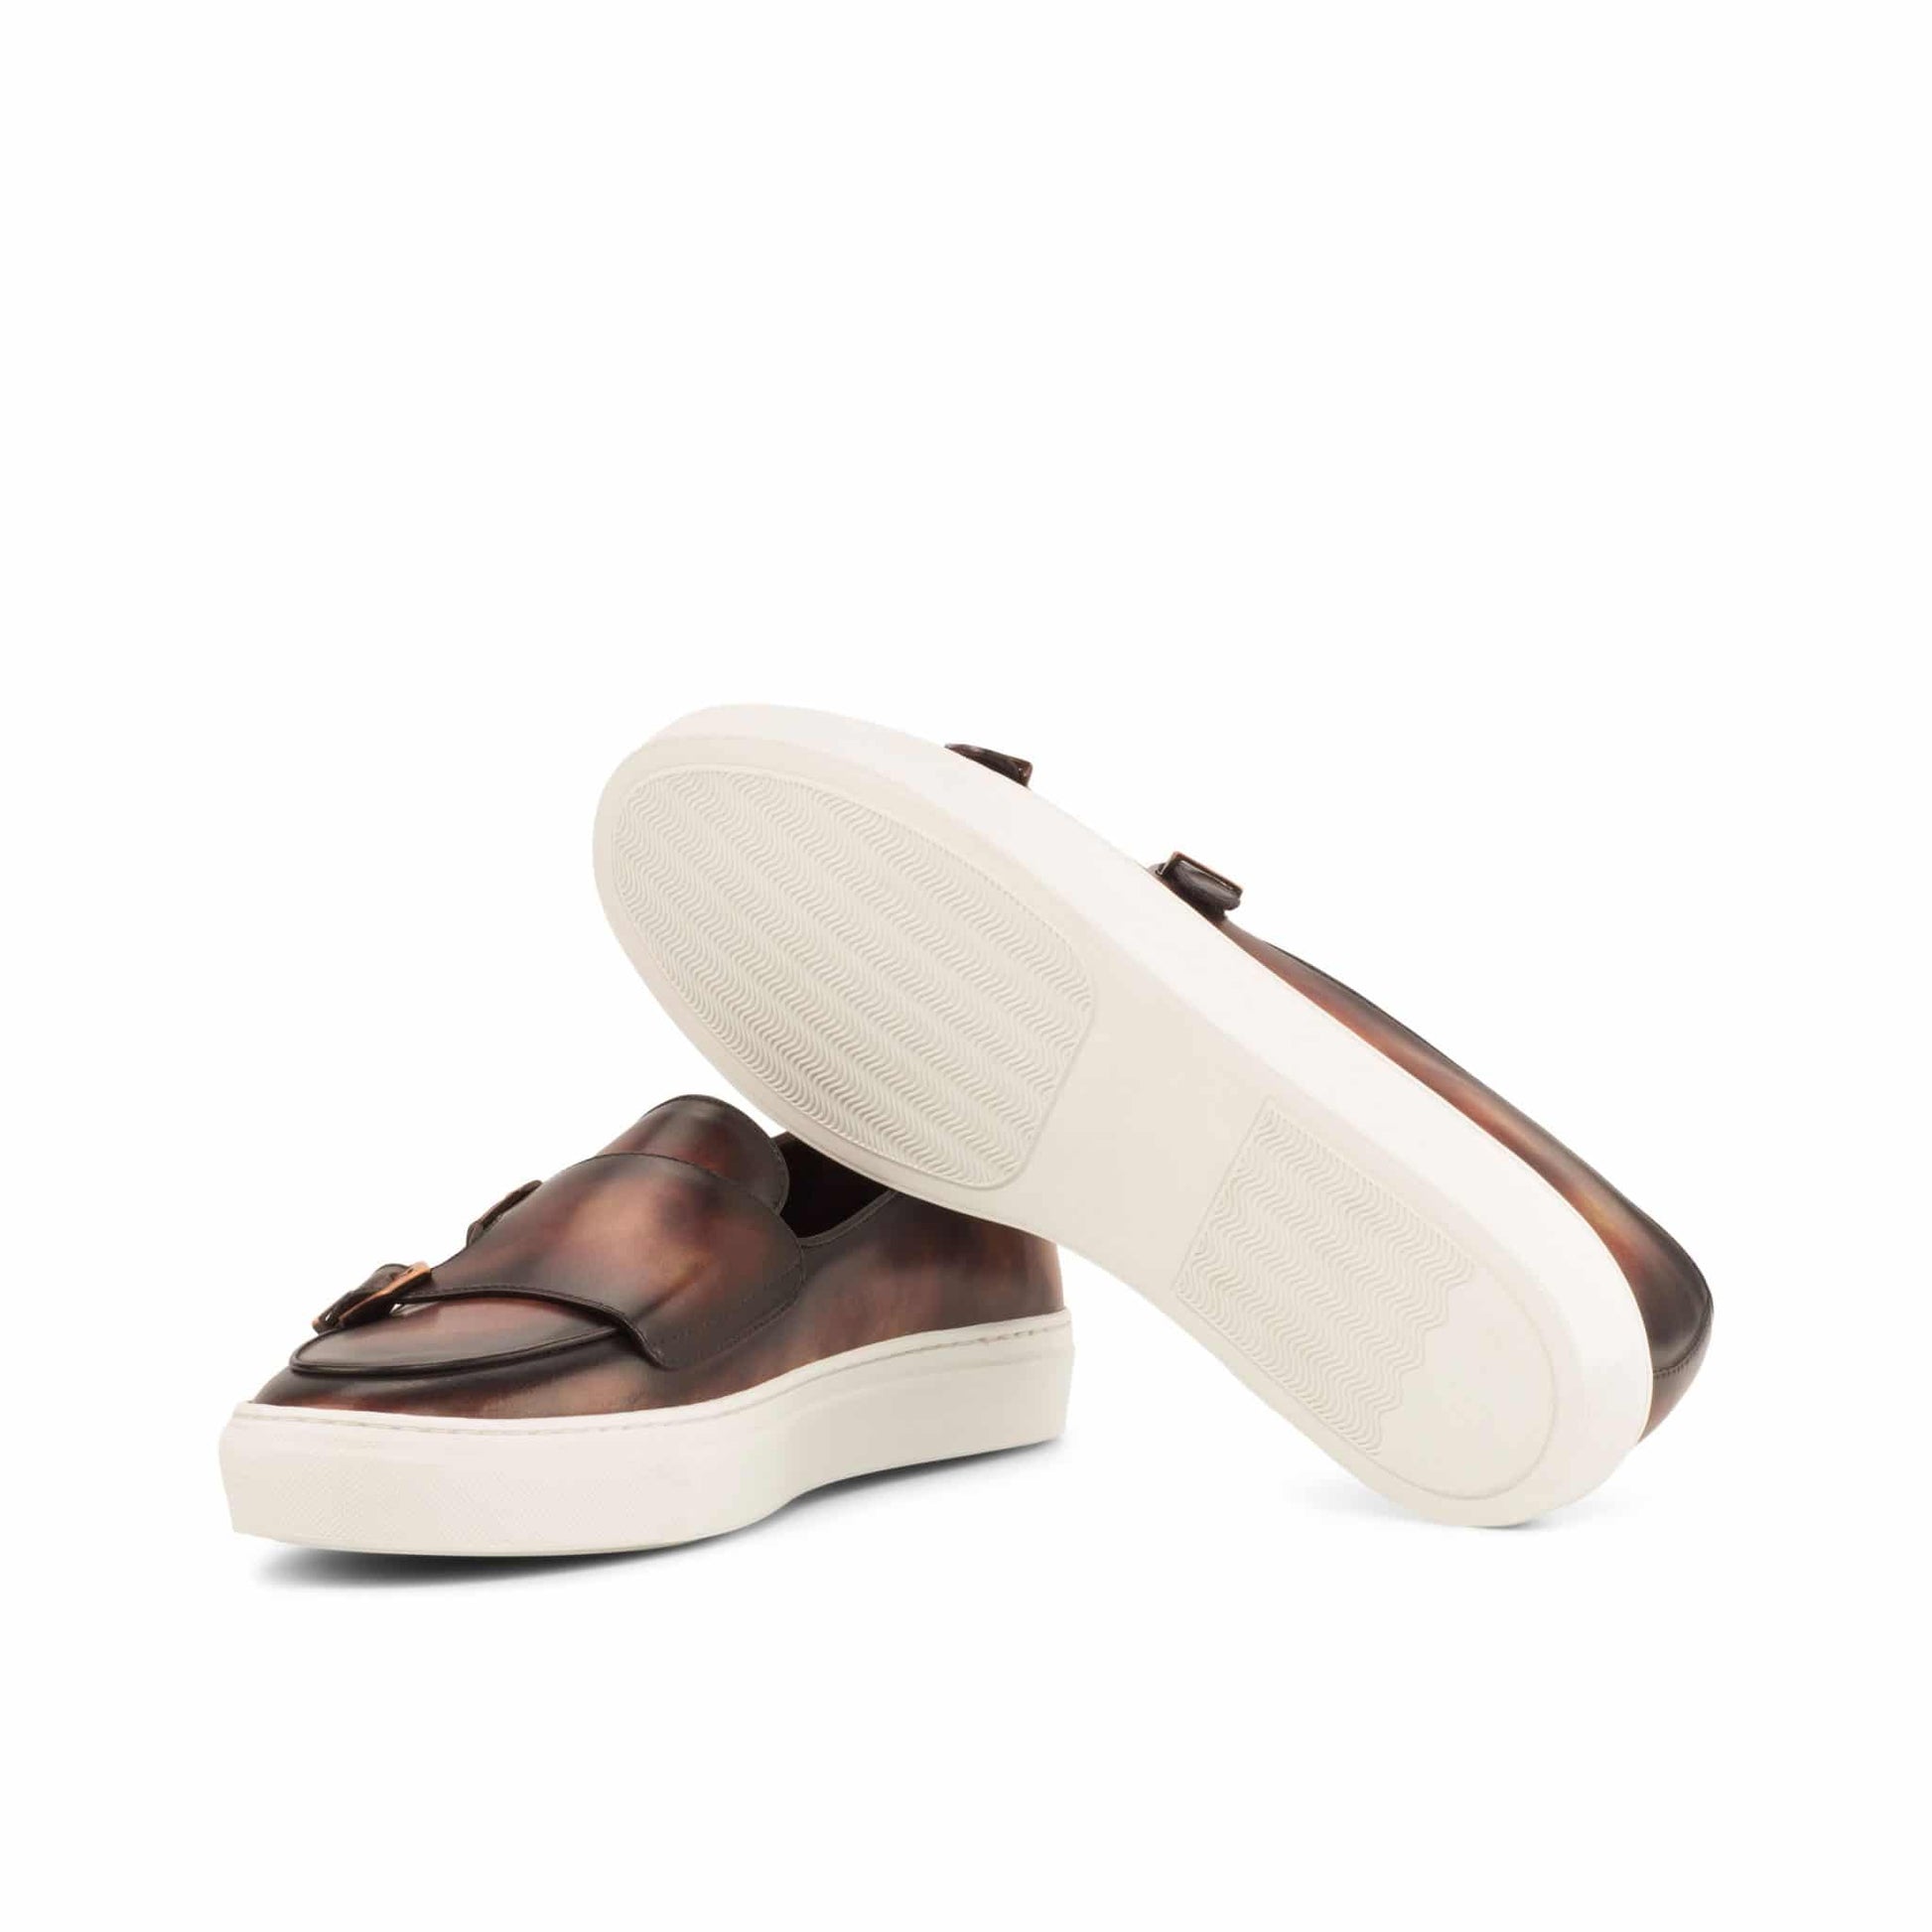 Dark Brown Patina Finish Leather Slip On Monk Strap Sneaker for Men. White Comfortable Cup Sole.